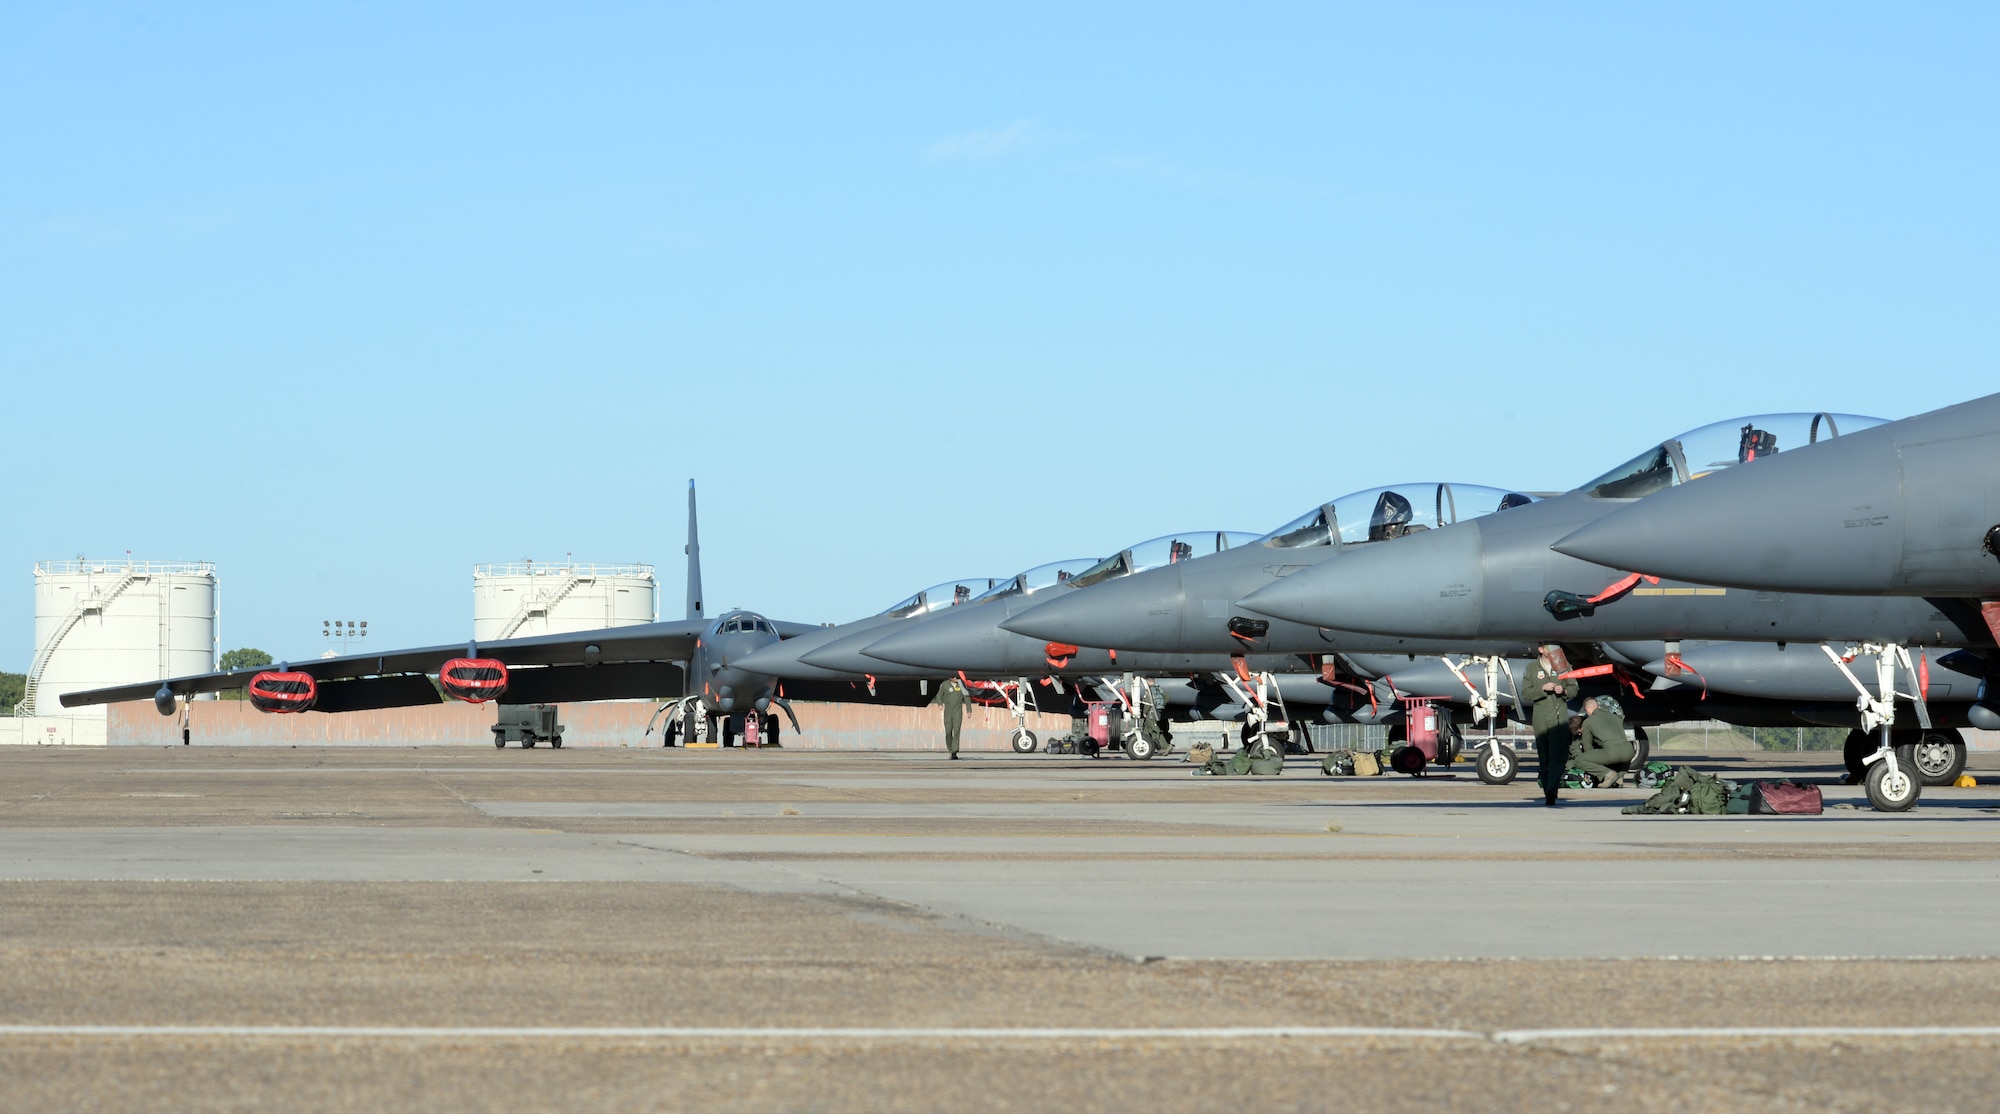 A B-52 Stratofortress and F-15E Strike Eagles share the flightline at Barksdale Air Force Base, La., Oct. 1, 2015. More than 65 aircraft from Seymour Johnson AFB, N.C., were relocated to avoid potential damage from Hurricane Joaquin along the East Coast. (U.S. Air Force photo/Airman 1st Class Curt Beach)